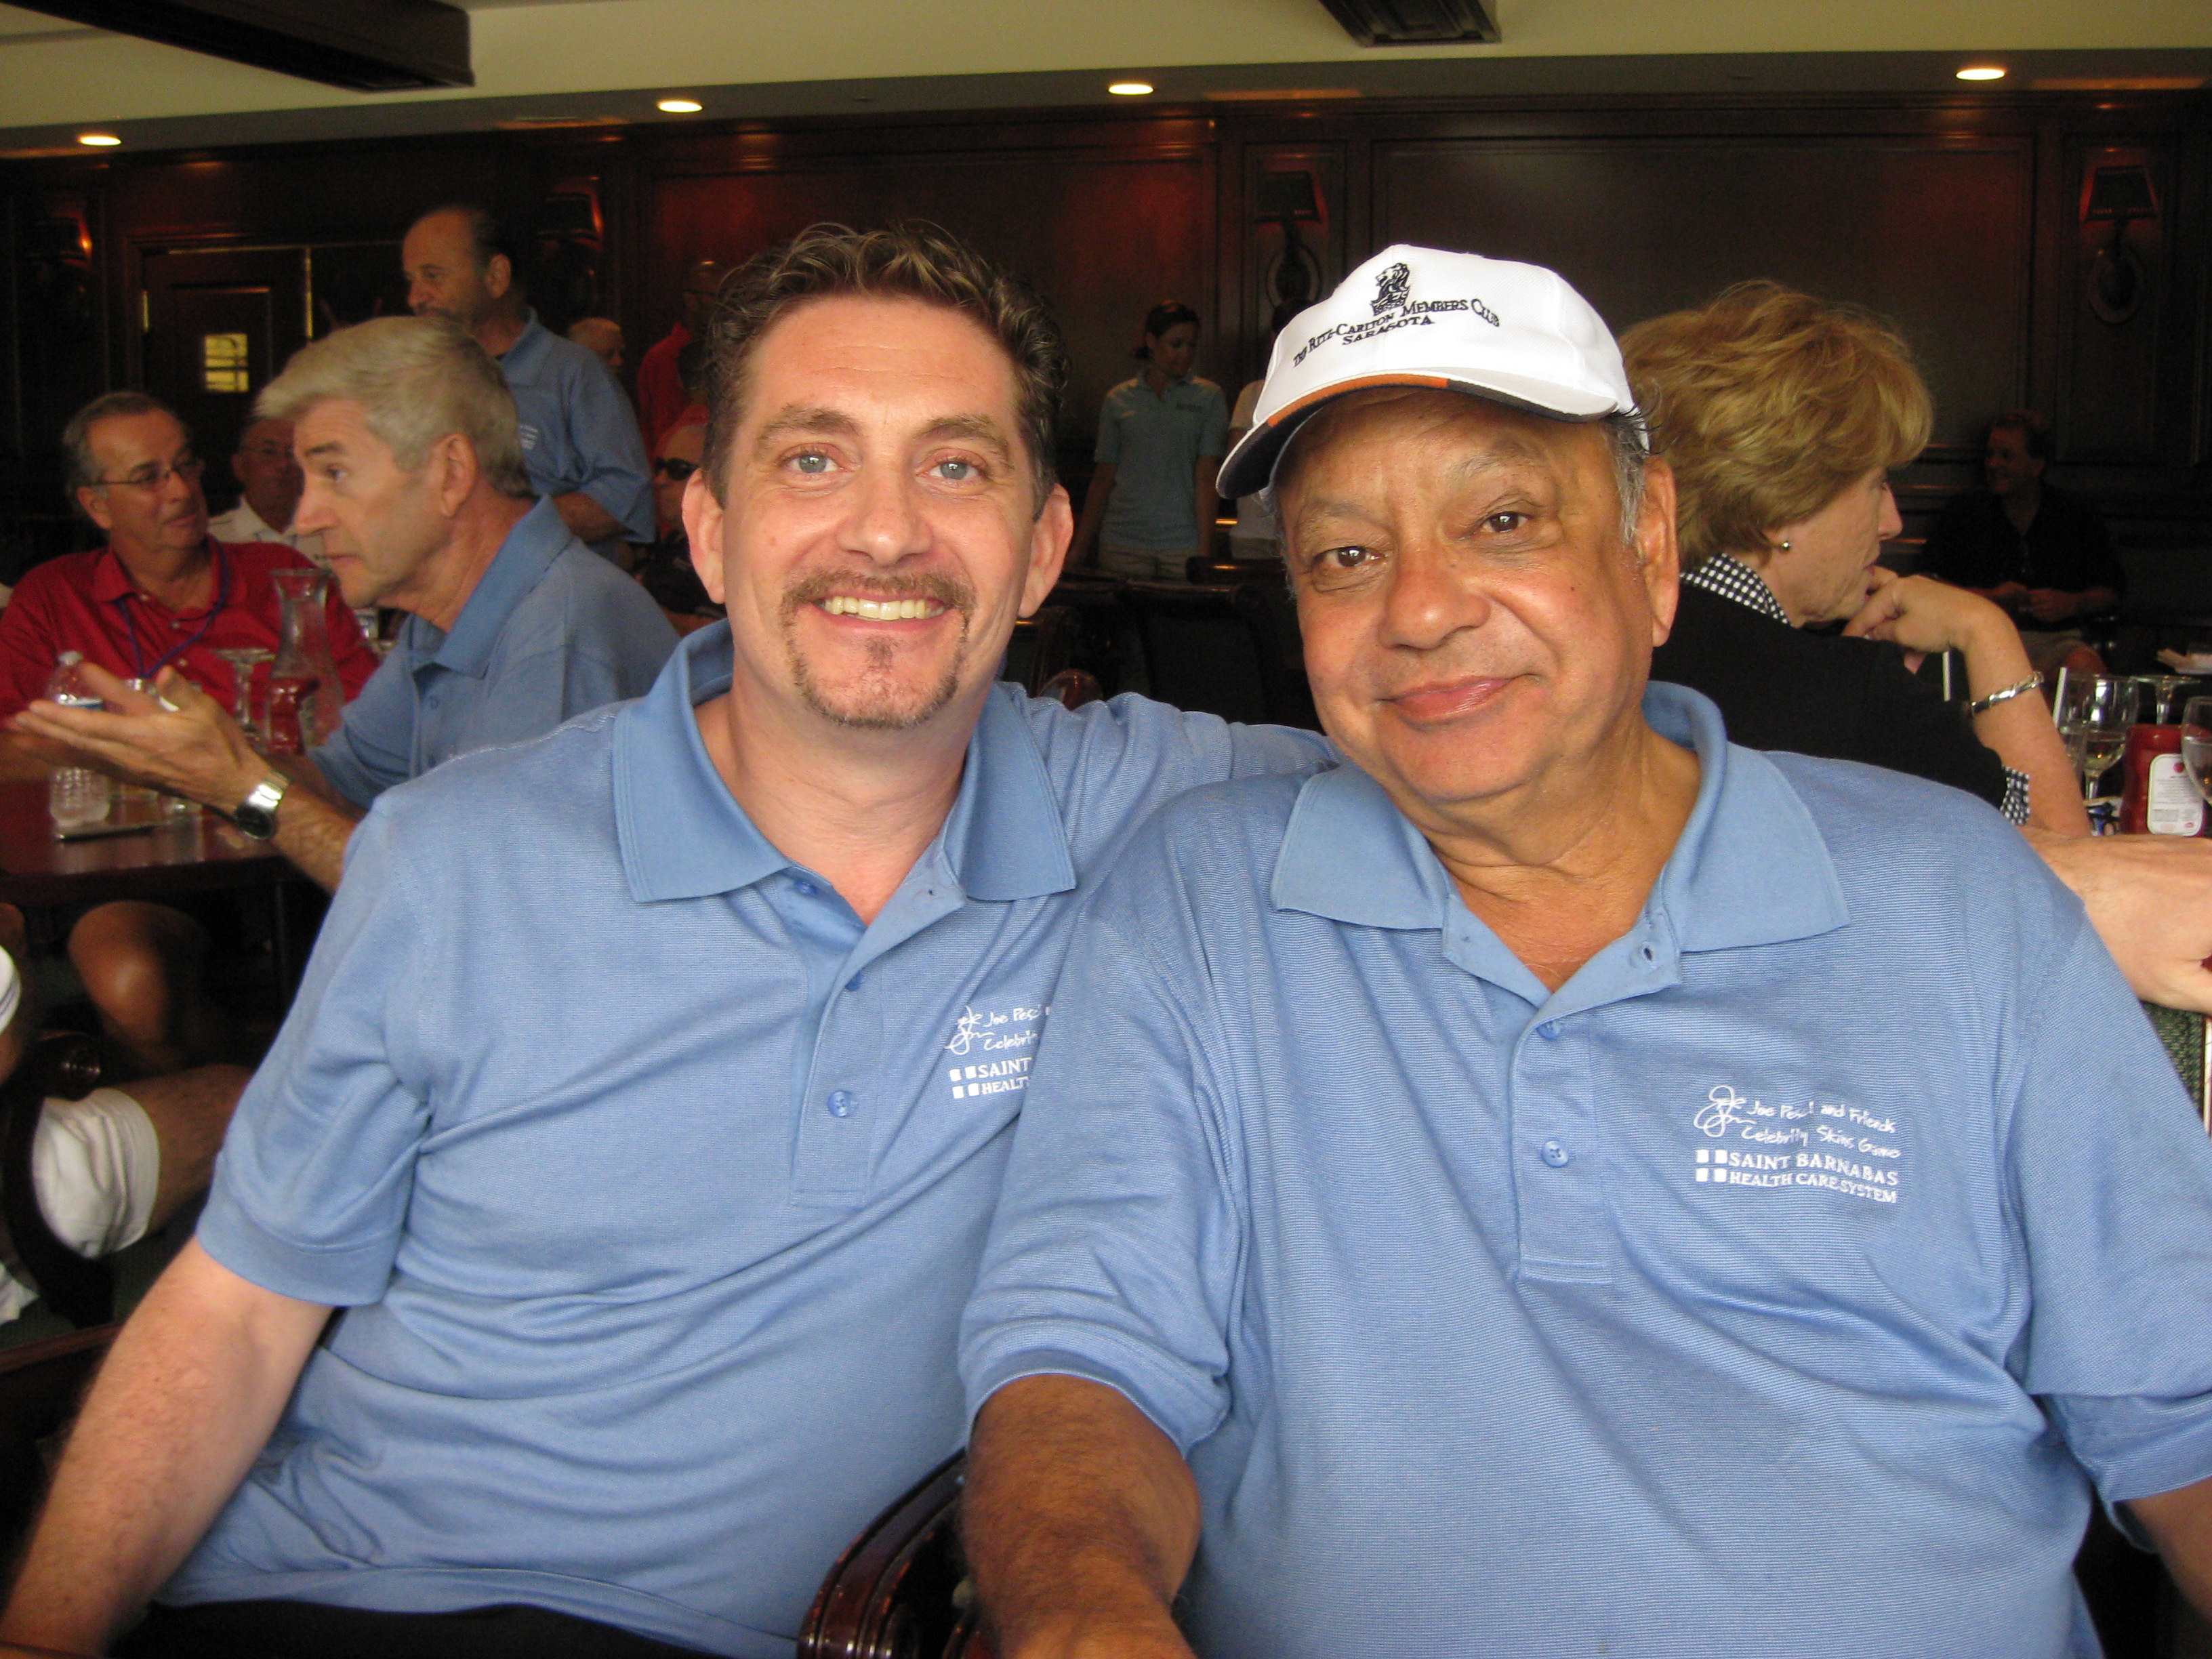 Cheech Marin and Michael Christaldi at a Joe Pesci Celebrity Golf Outing to benefit St. Barnabas Hospital in Floram Park NJ.